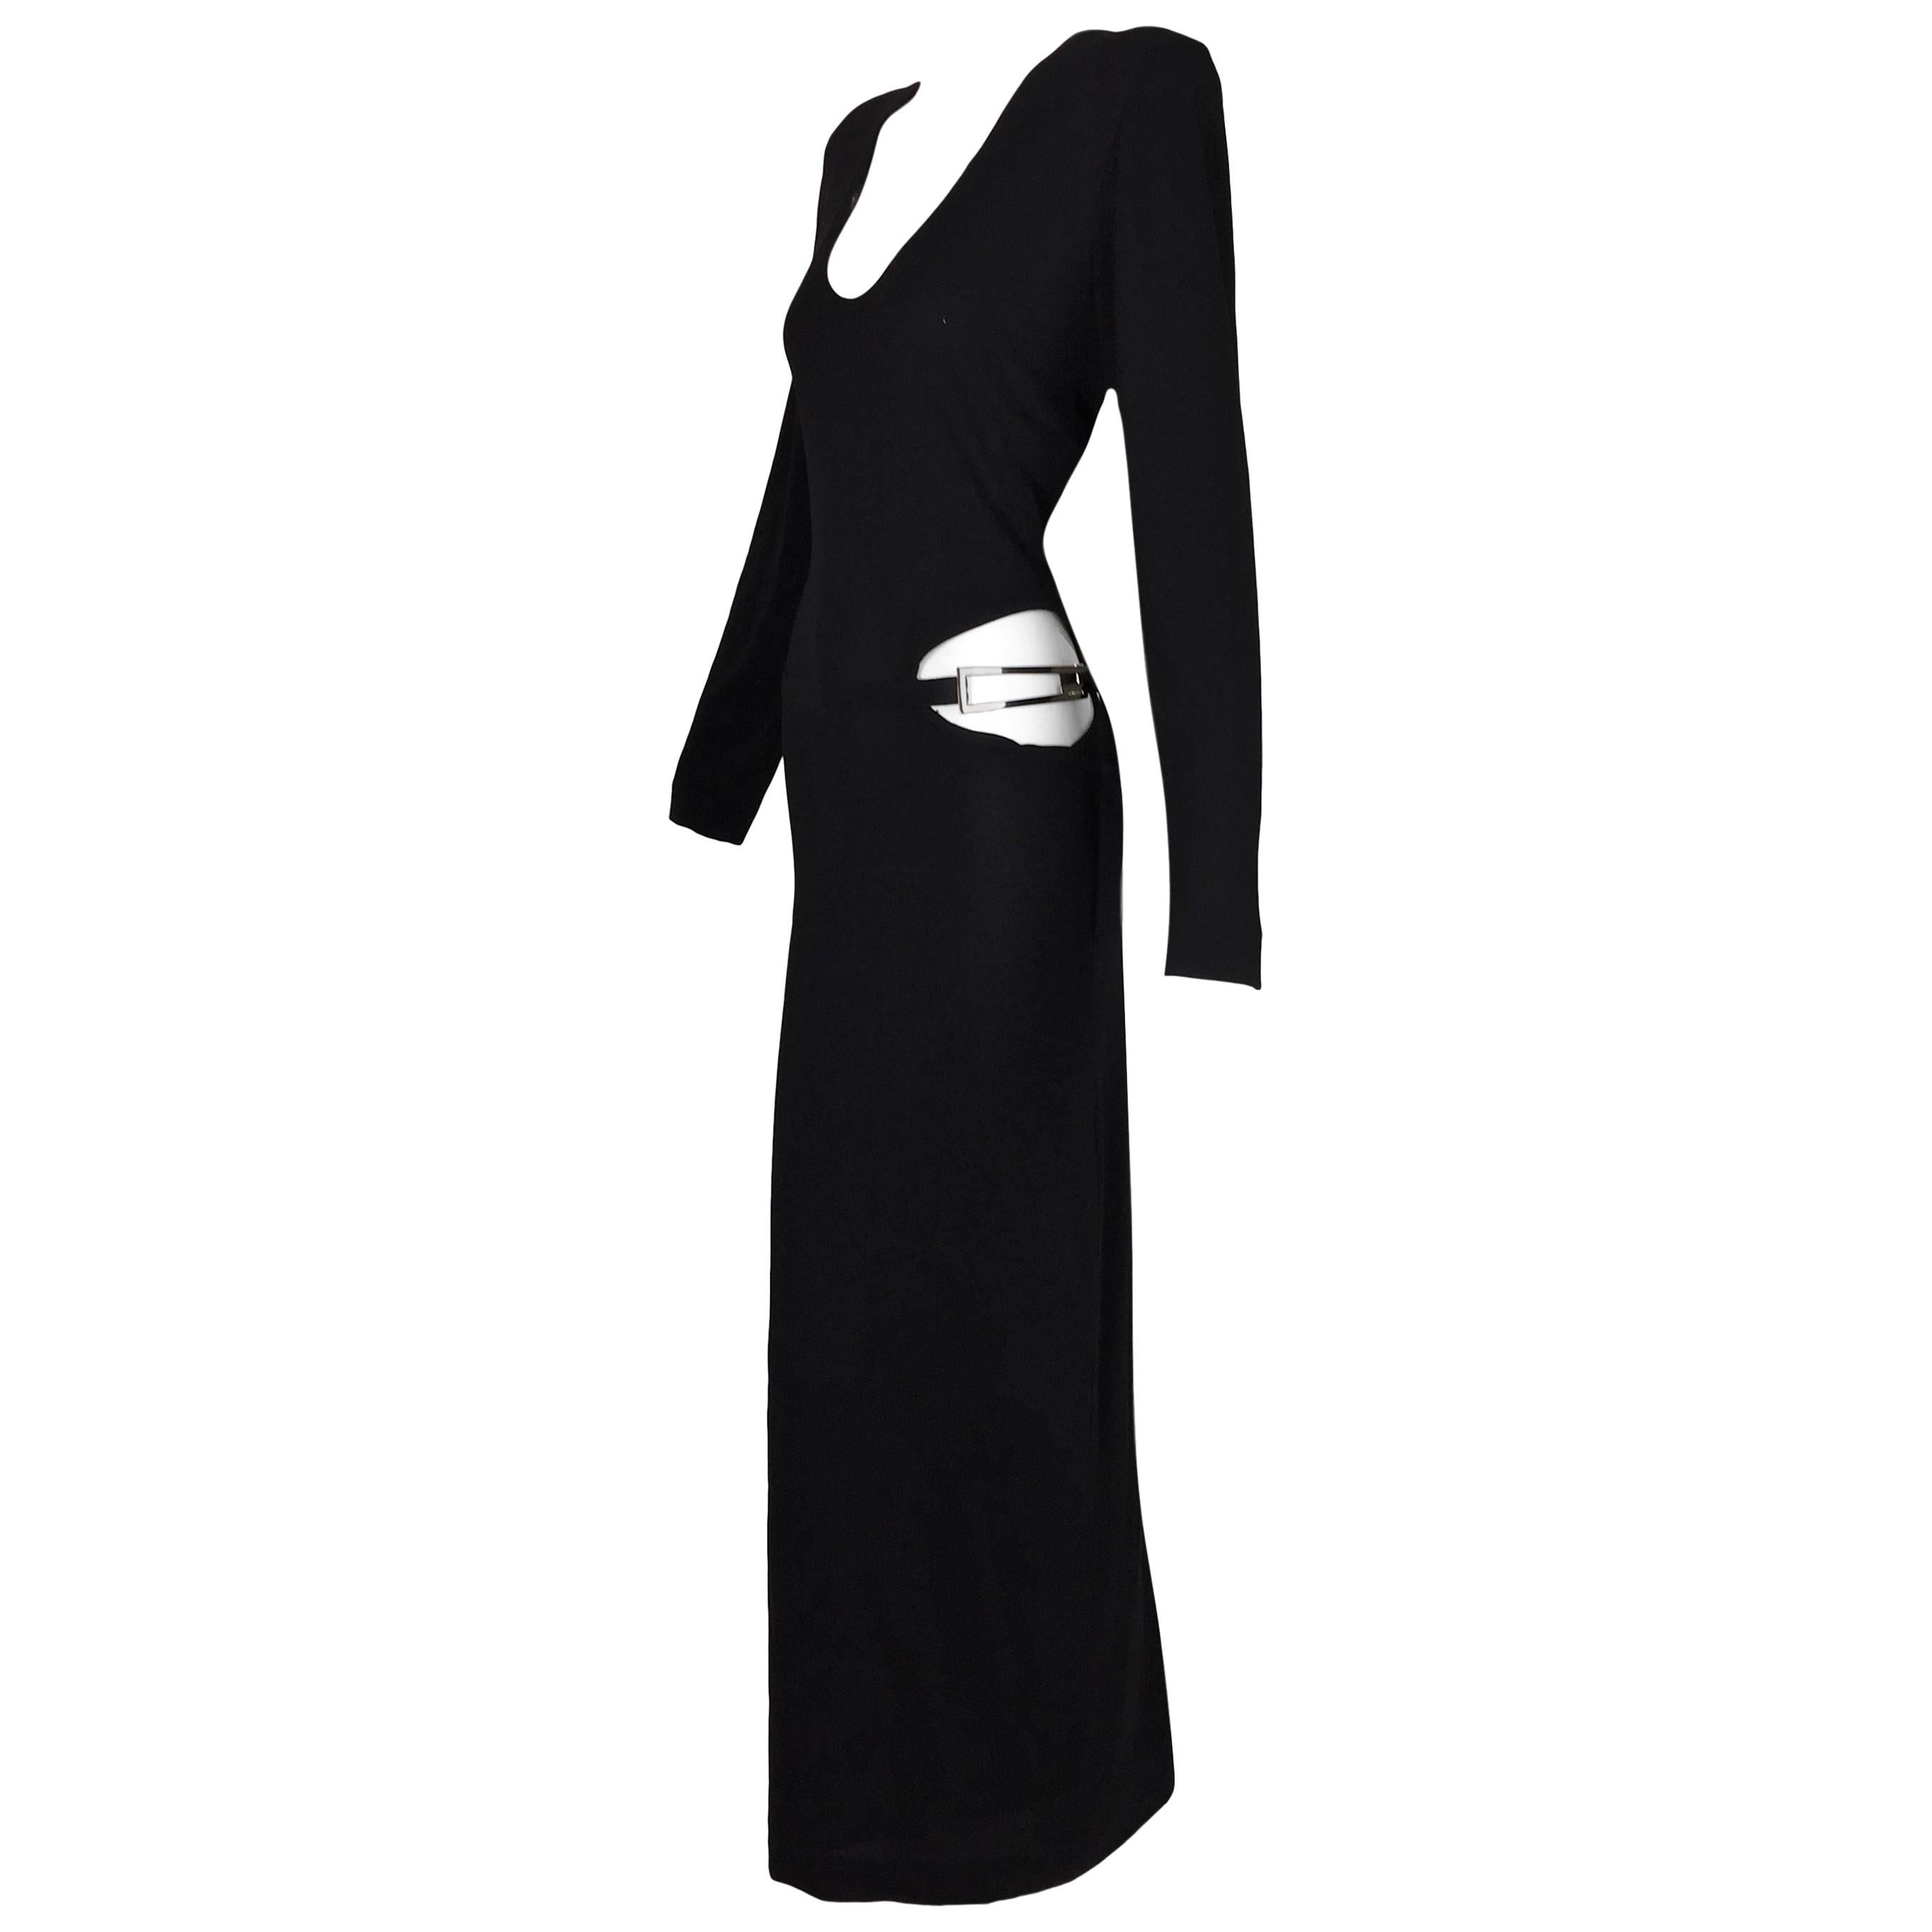 Gucci by Tom Ford High Shoulder L / S Cut-Out Black Gown Dress, F / W 1997 